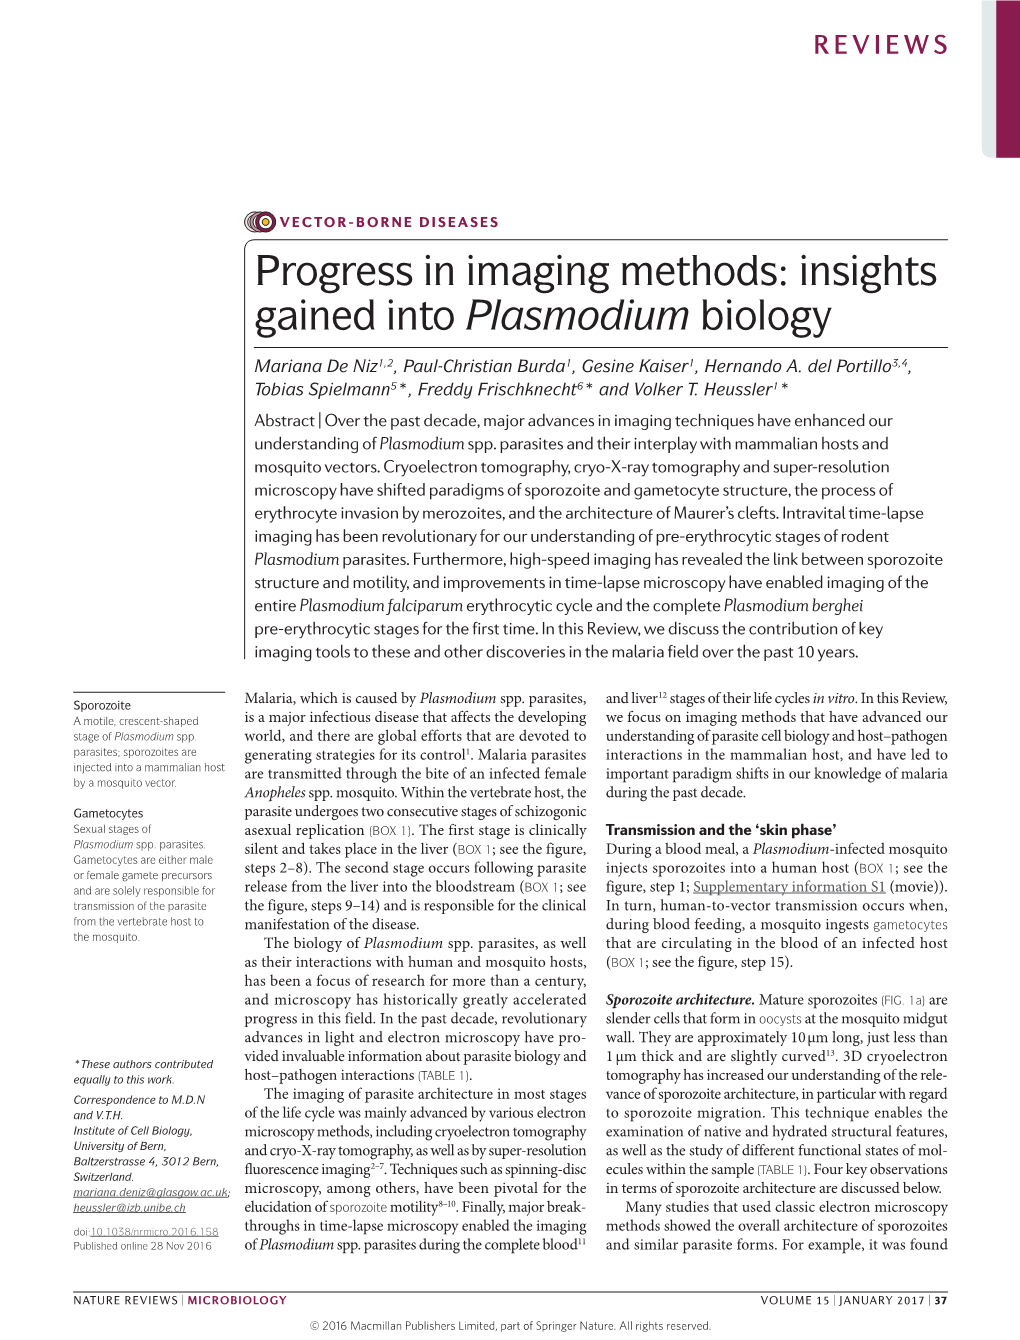 Insights Gained Into Plasmodium Biology